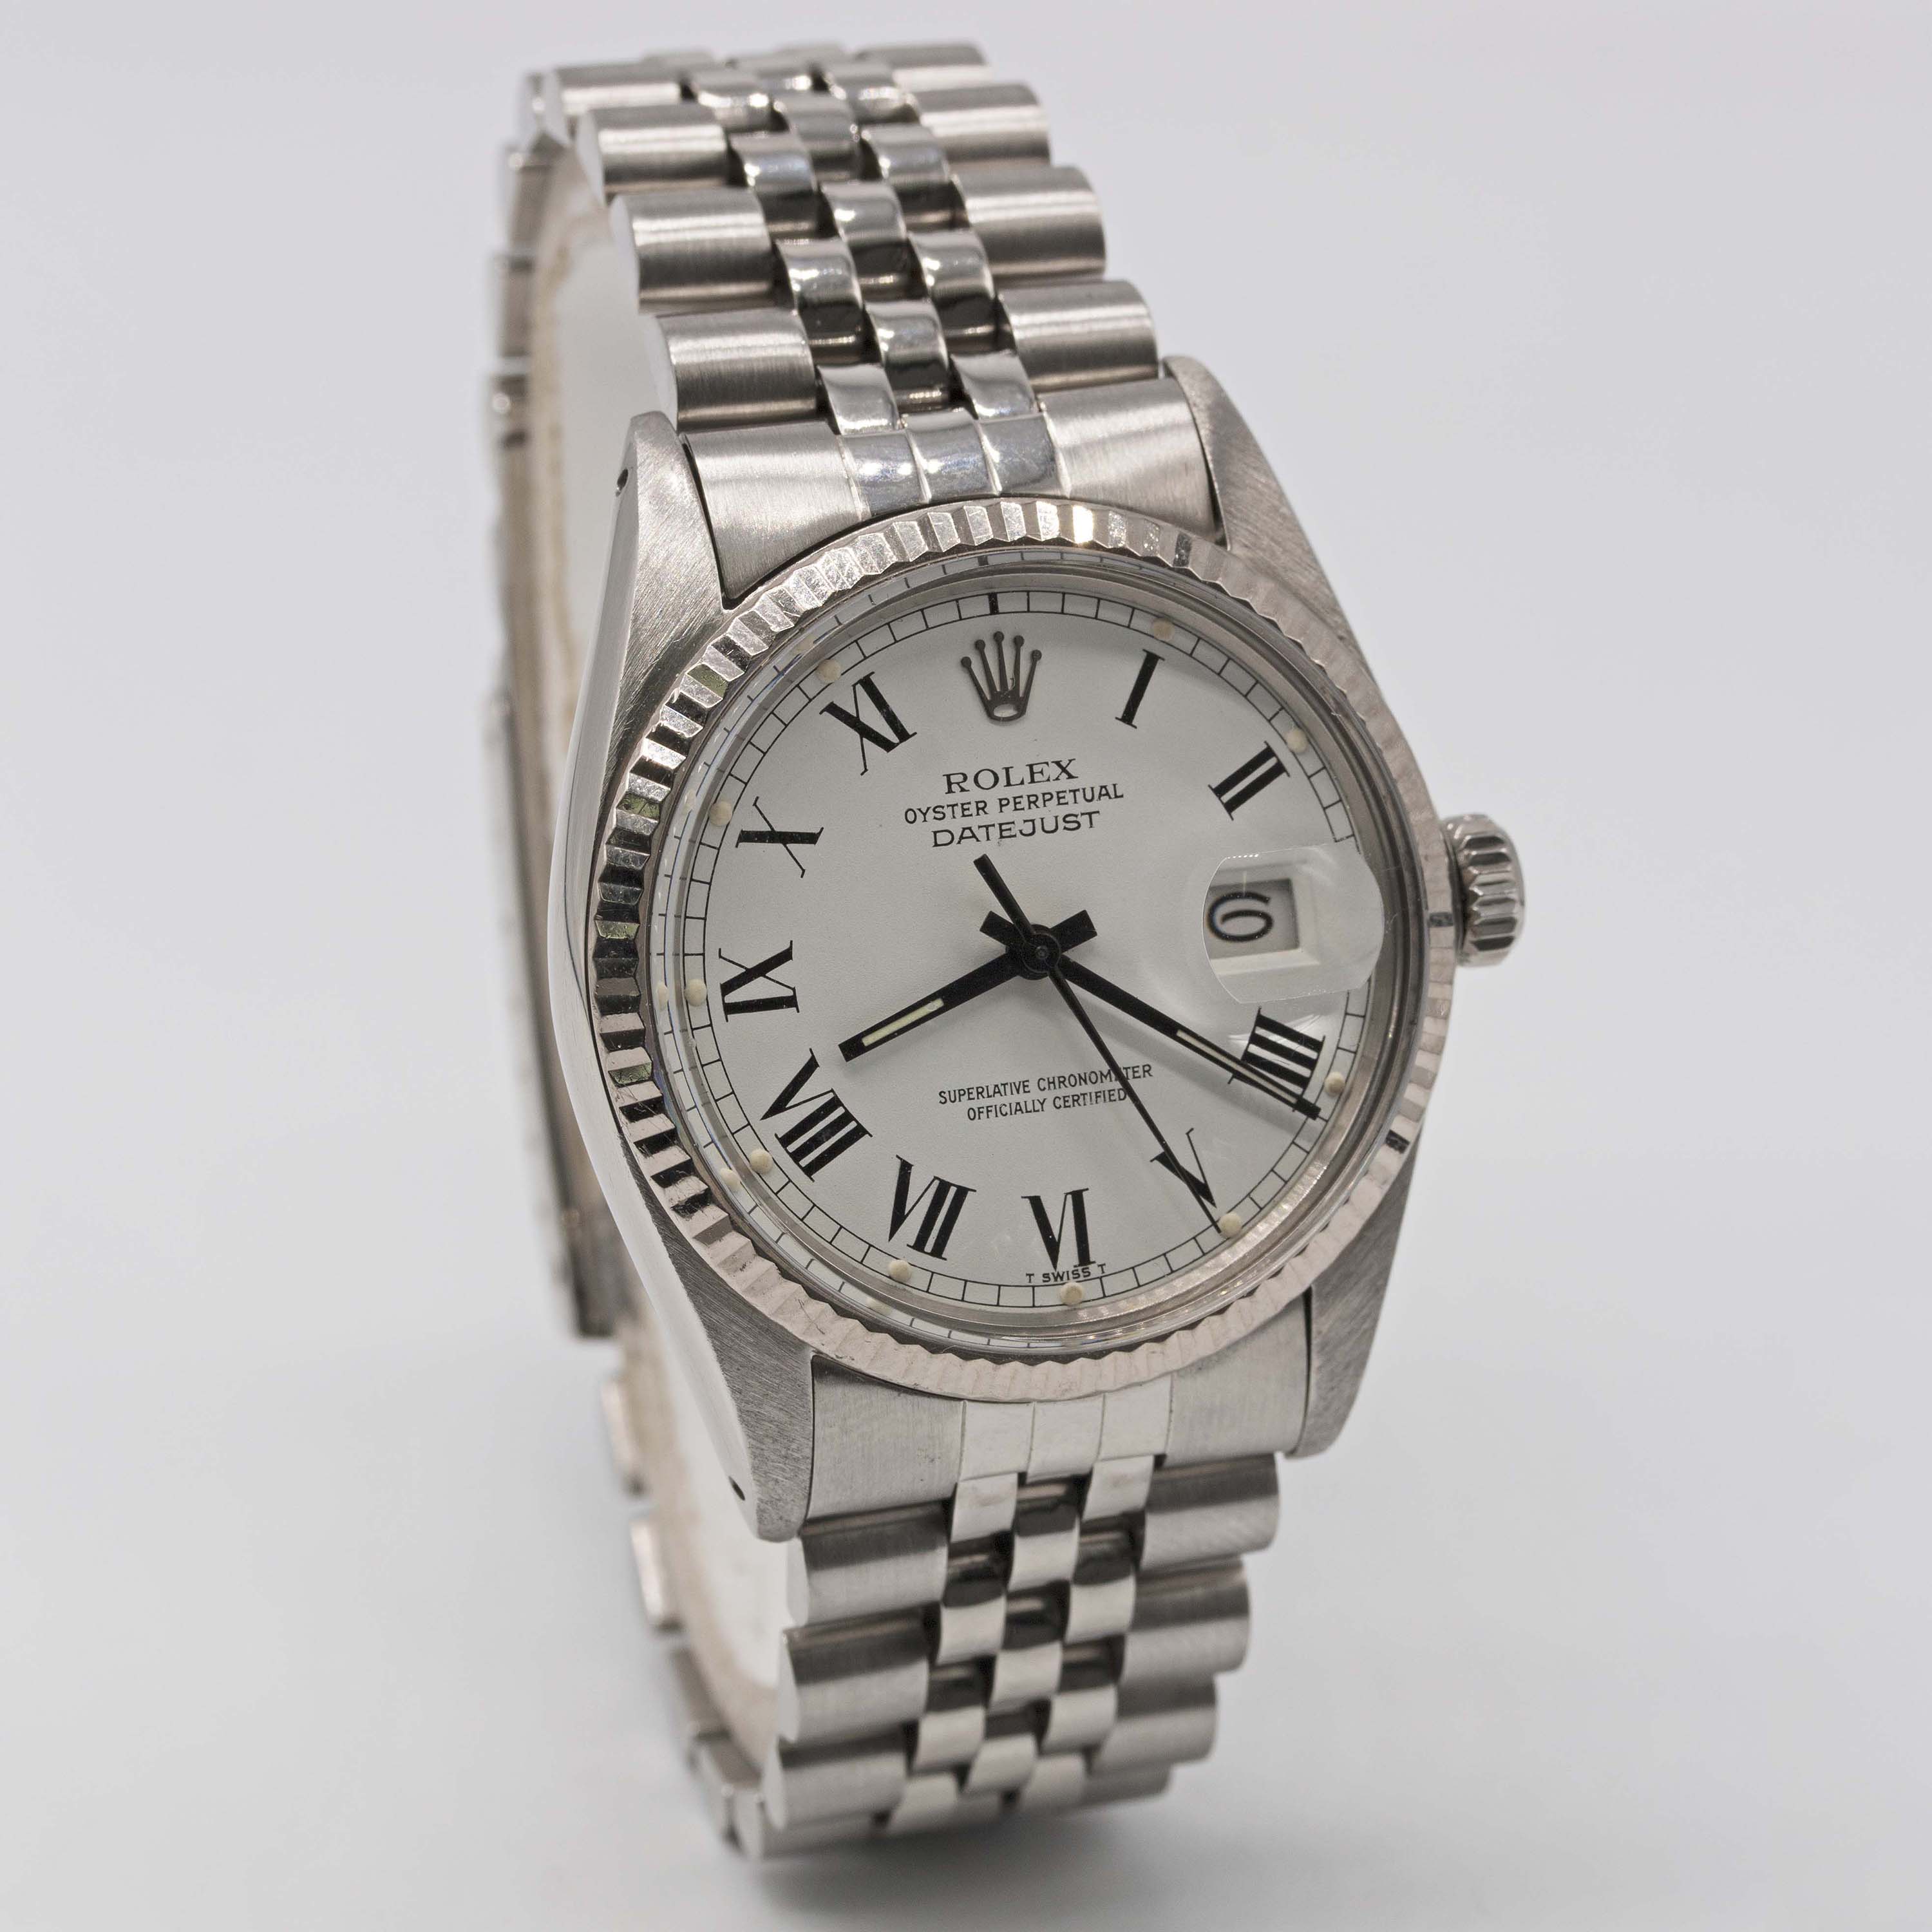 A GENTLEMAN'S STEEL & WHITE GOLD ROLEX OYSTER PERPETUAL DATEJUST BRACELET WATCH CIRCA 1984, REF. - Image 5 of 11